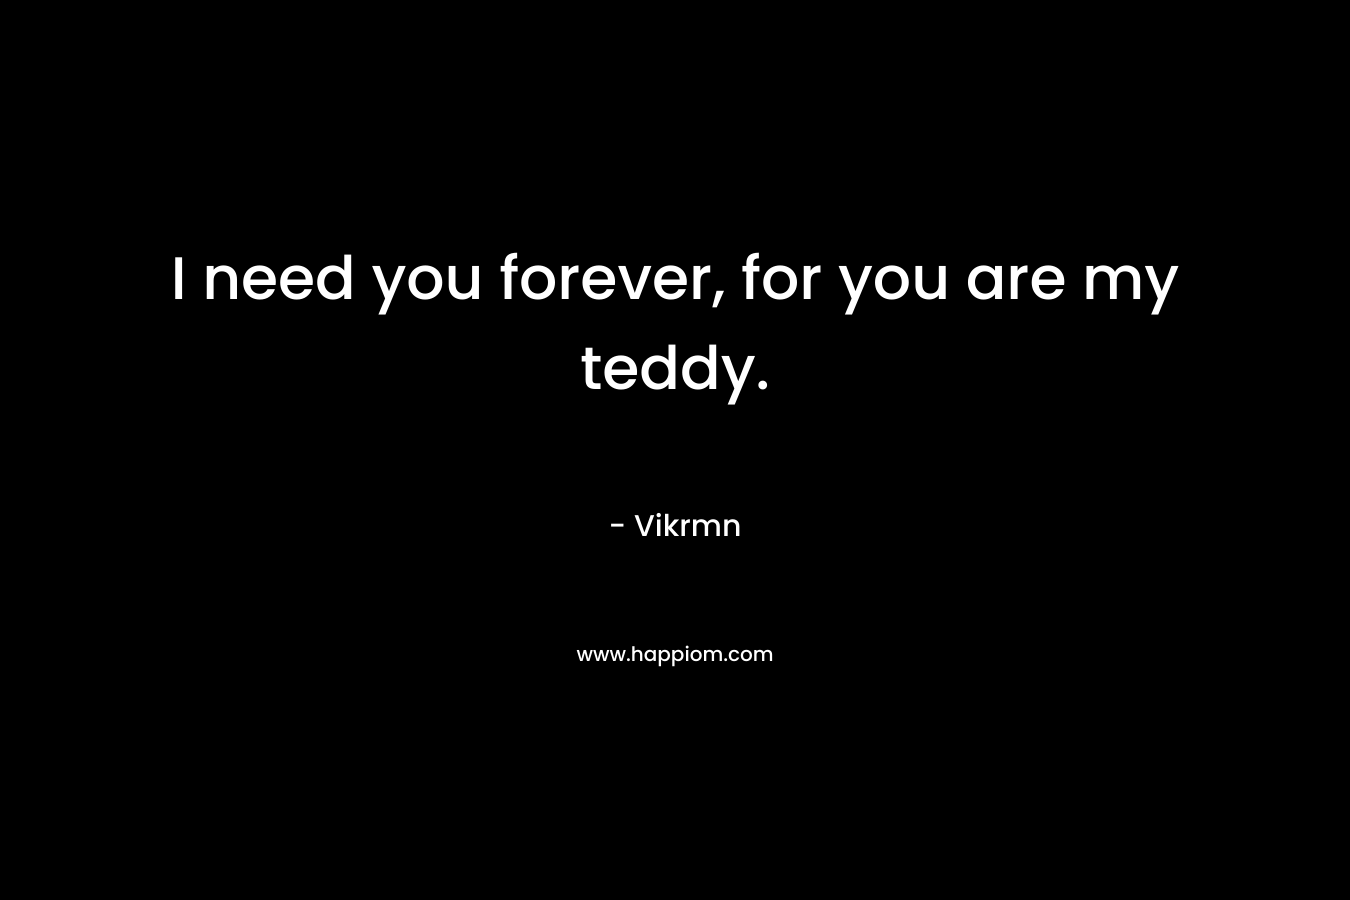 I need you forever, for you are my teddy.